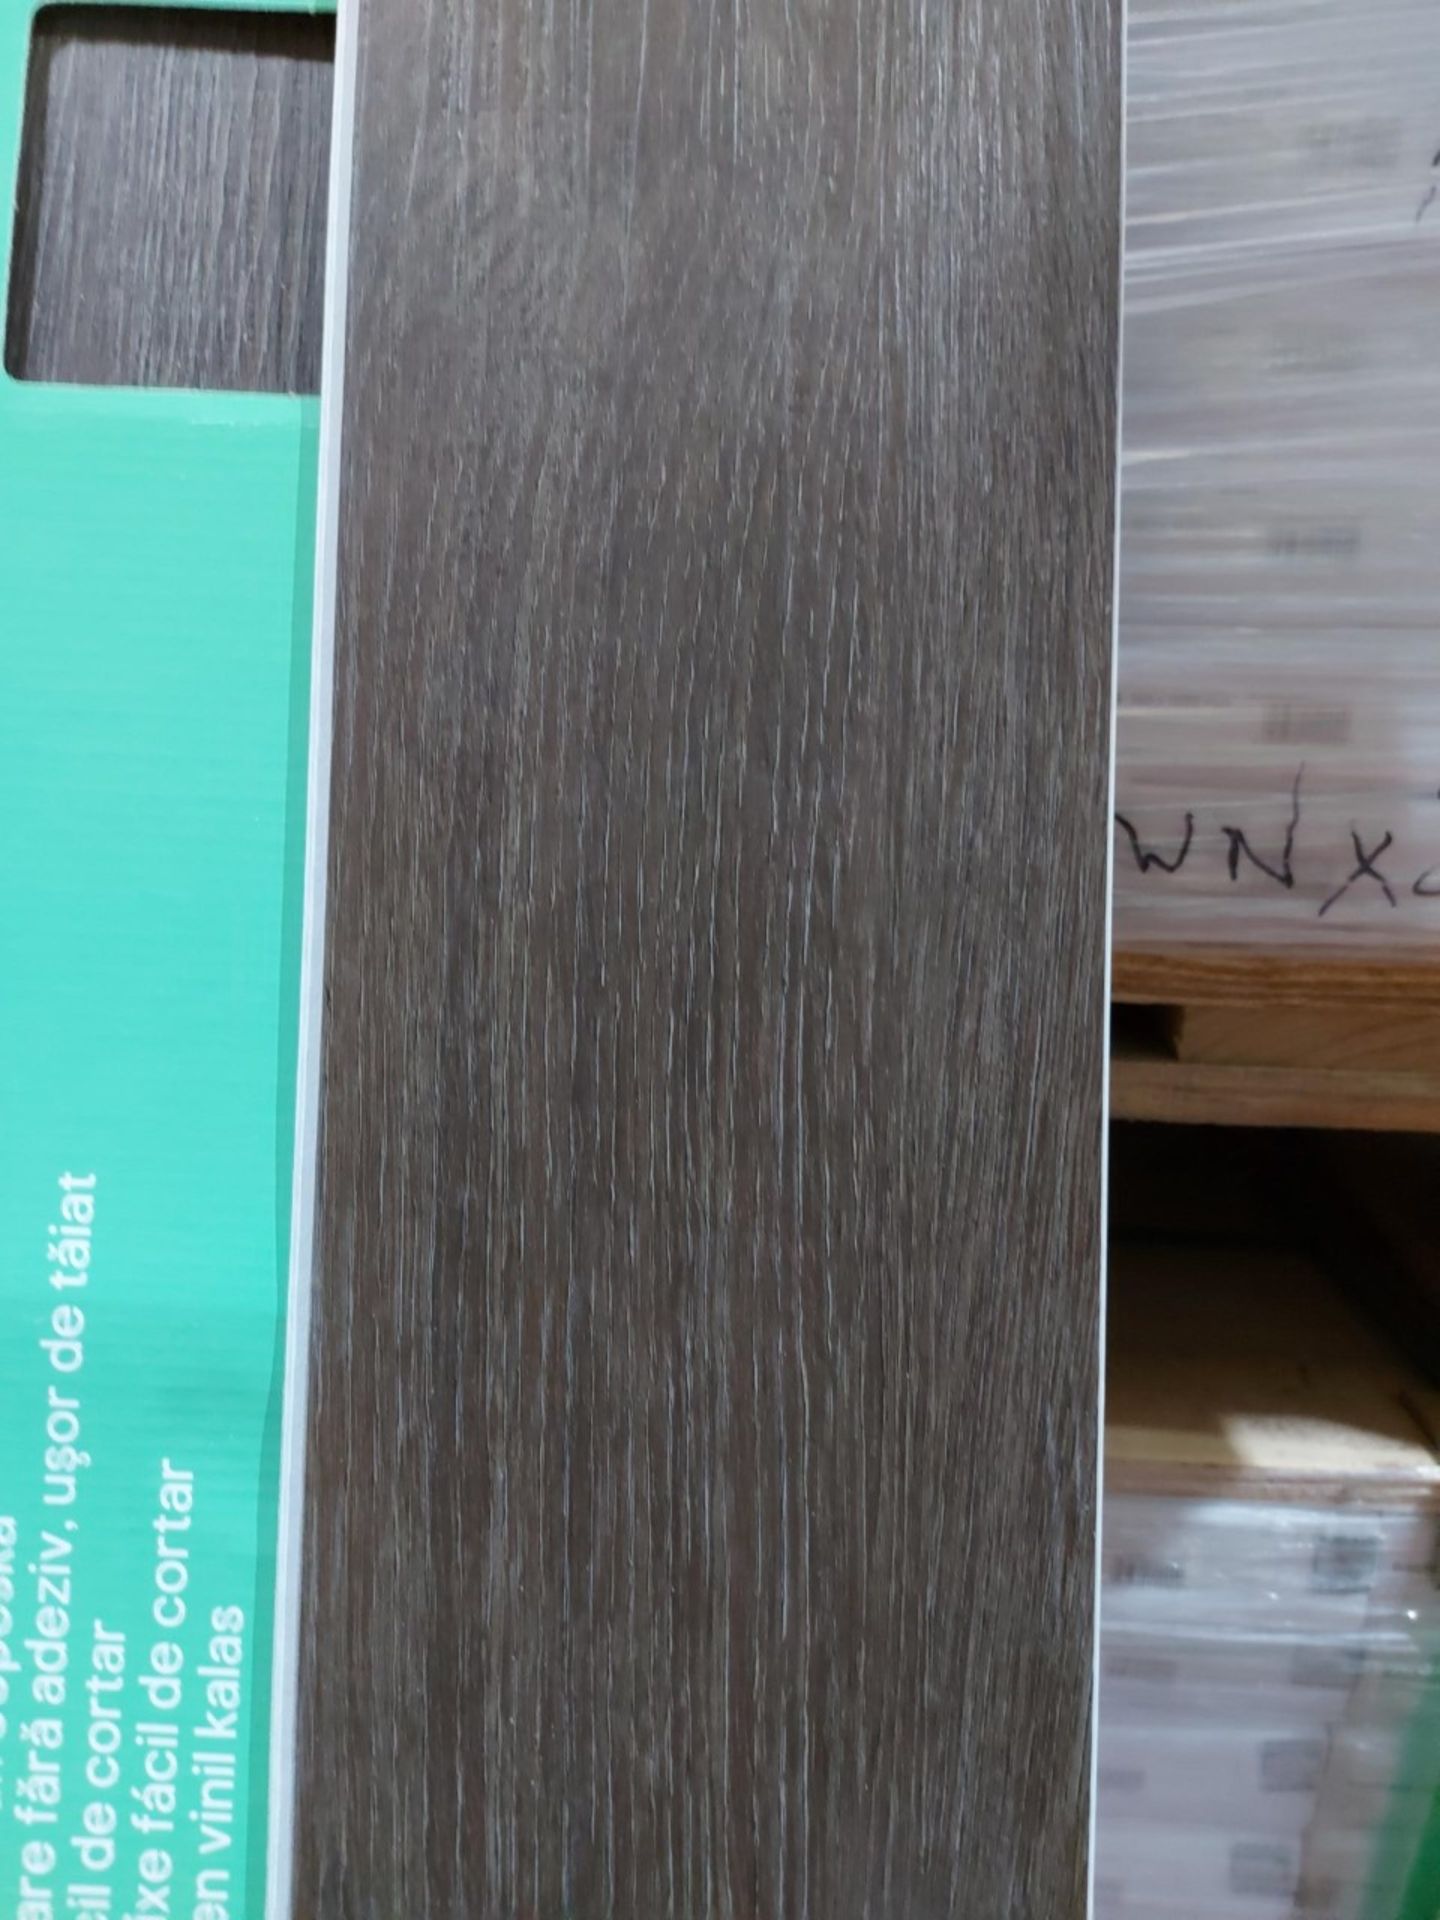 PALLET TO CONTAIN 25.6m2 OF BACHETA LUXURY VINYL CLICK PLANK FLOORING. BROWN. EASY TO CUT. 3.2MM - Image 4 of 5